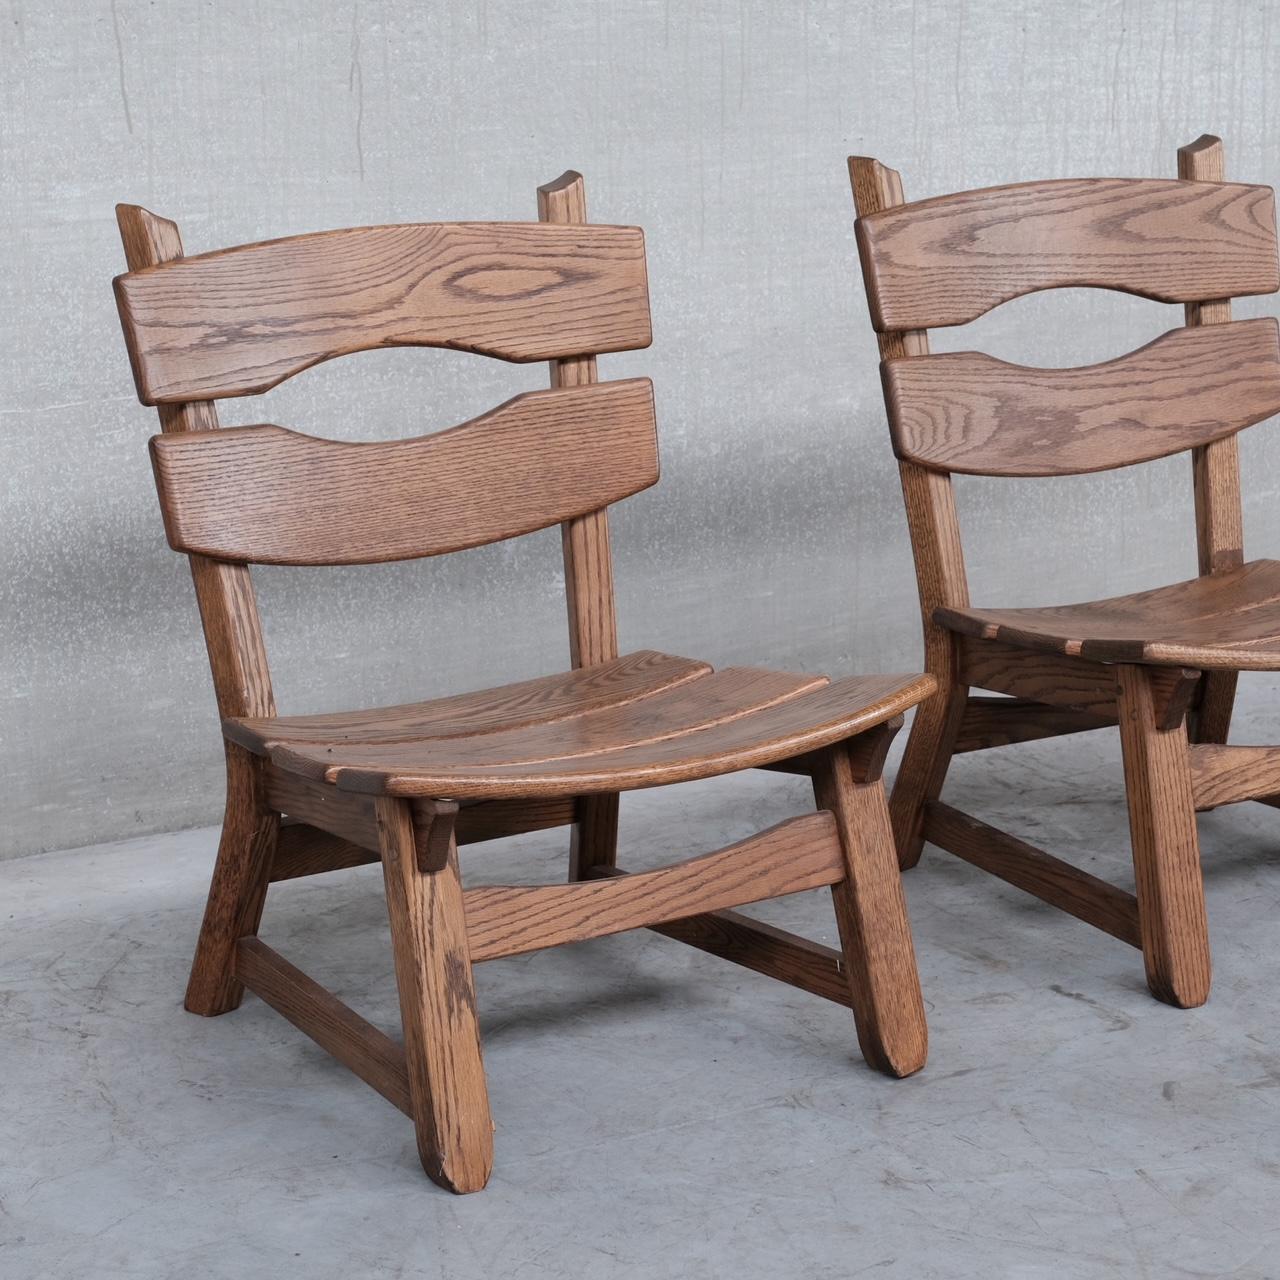 Brutalist Mid-Century Low Wooden Lounge Chairs '7' For Sale 8